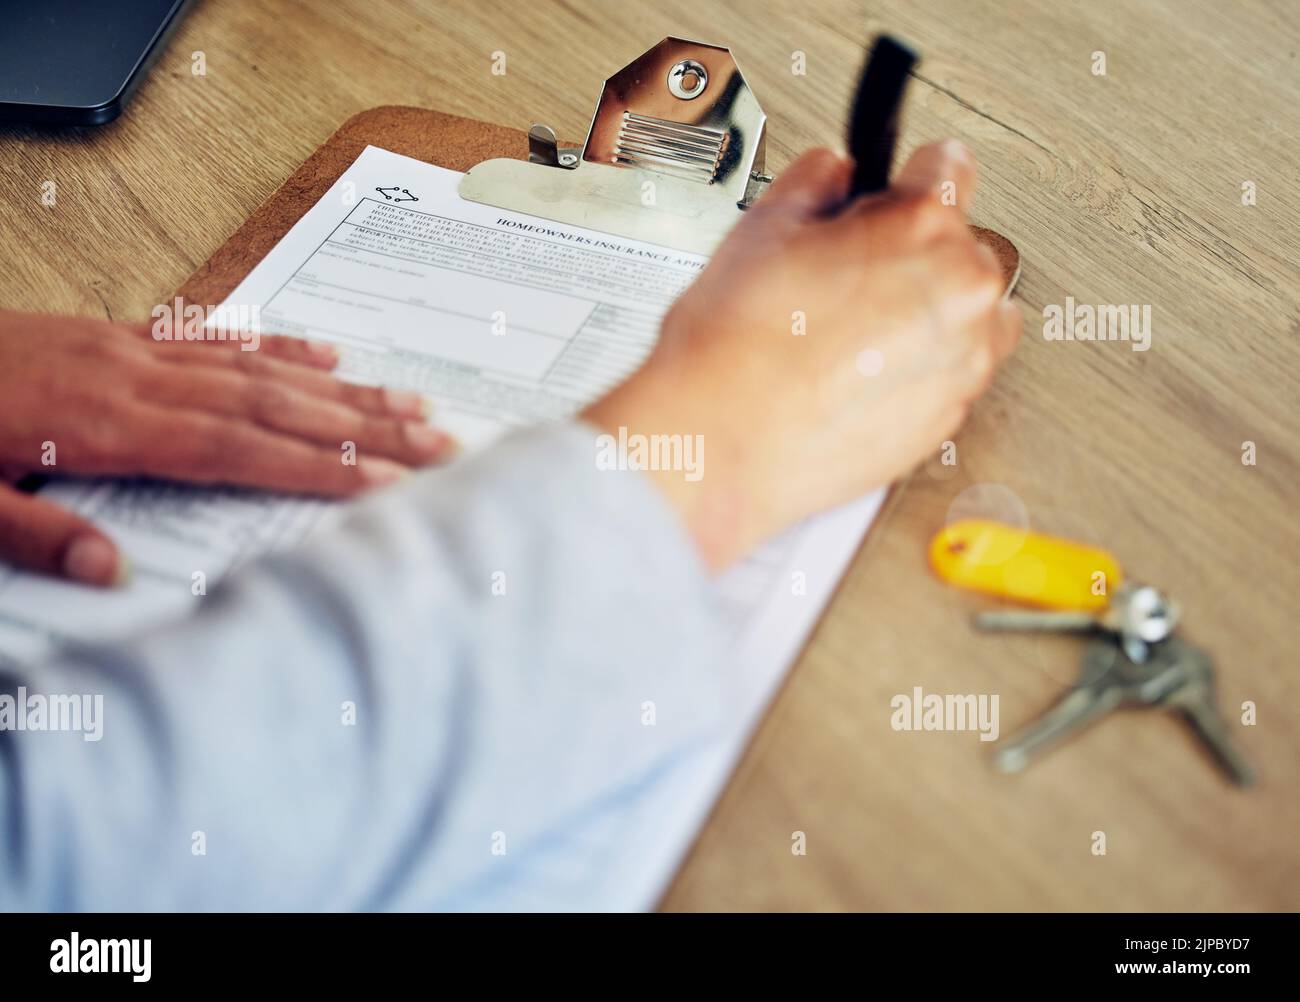 . Signing contract, document and paper closeup of banker, client or worker, writing or filling out information on insurance or loan form. Hands of Stock Photo